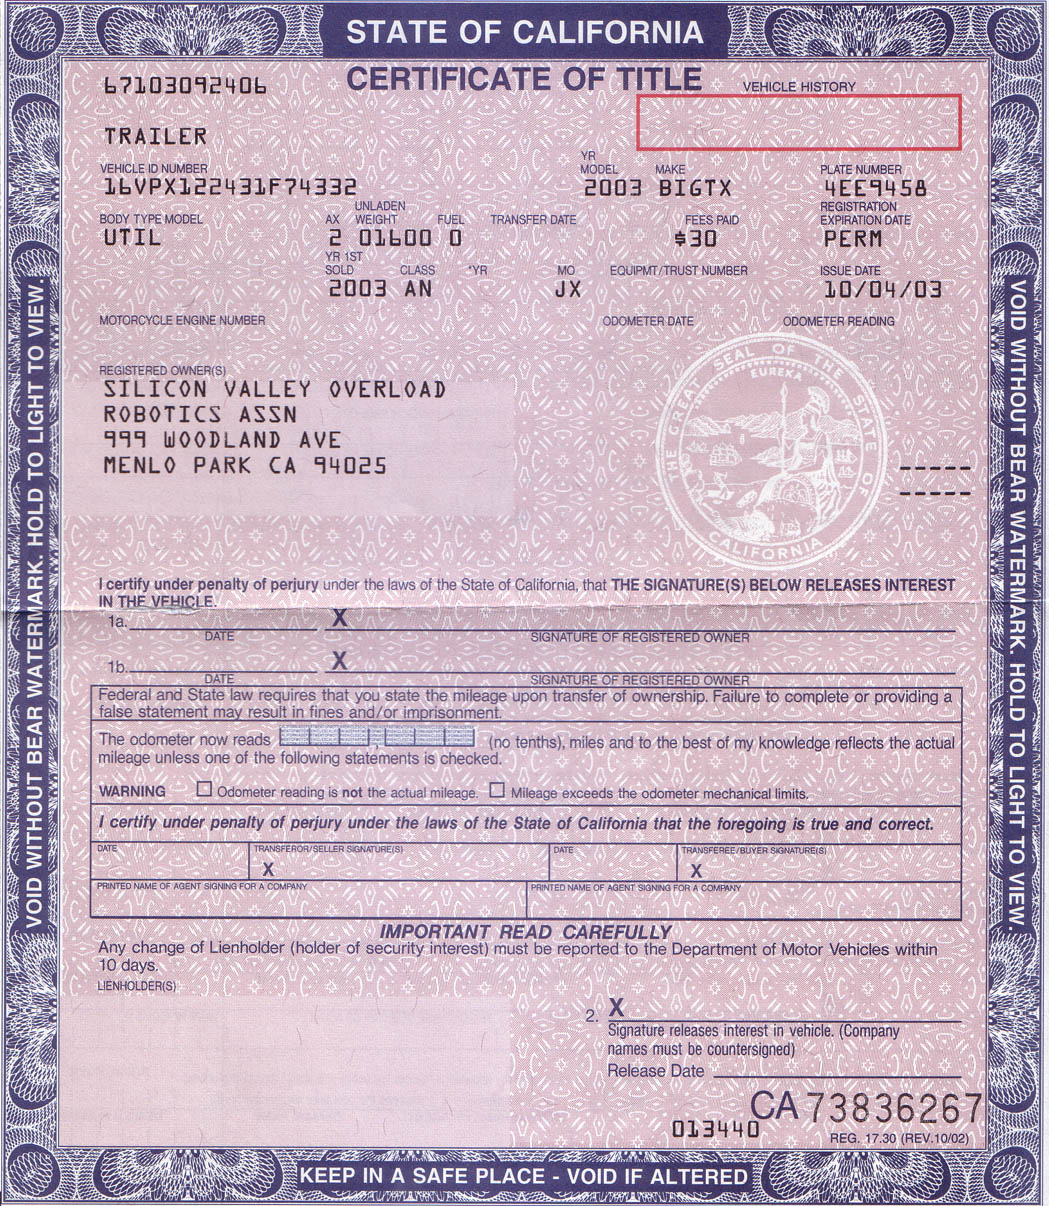 Certificate Of Title For A Vehicle - Vehicle Ideas regarding Simple Certificate Of Championship